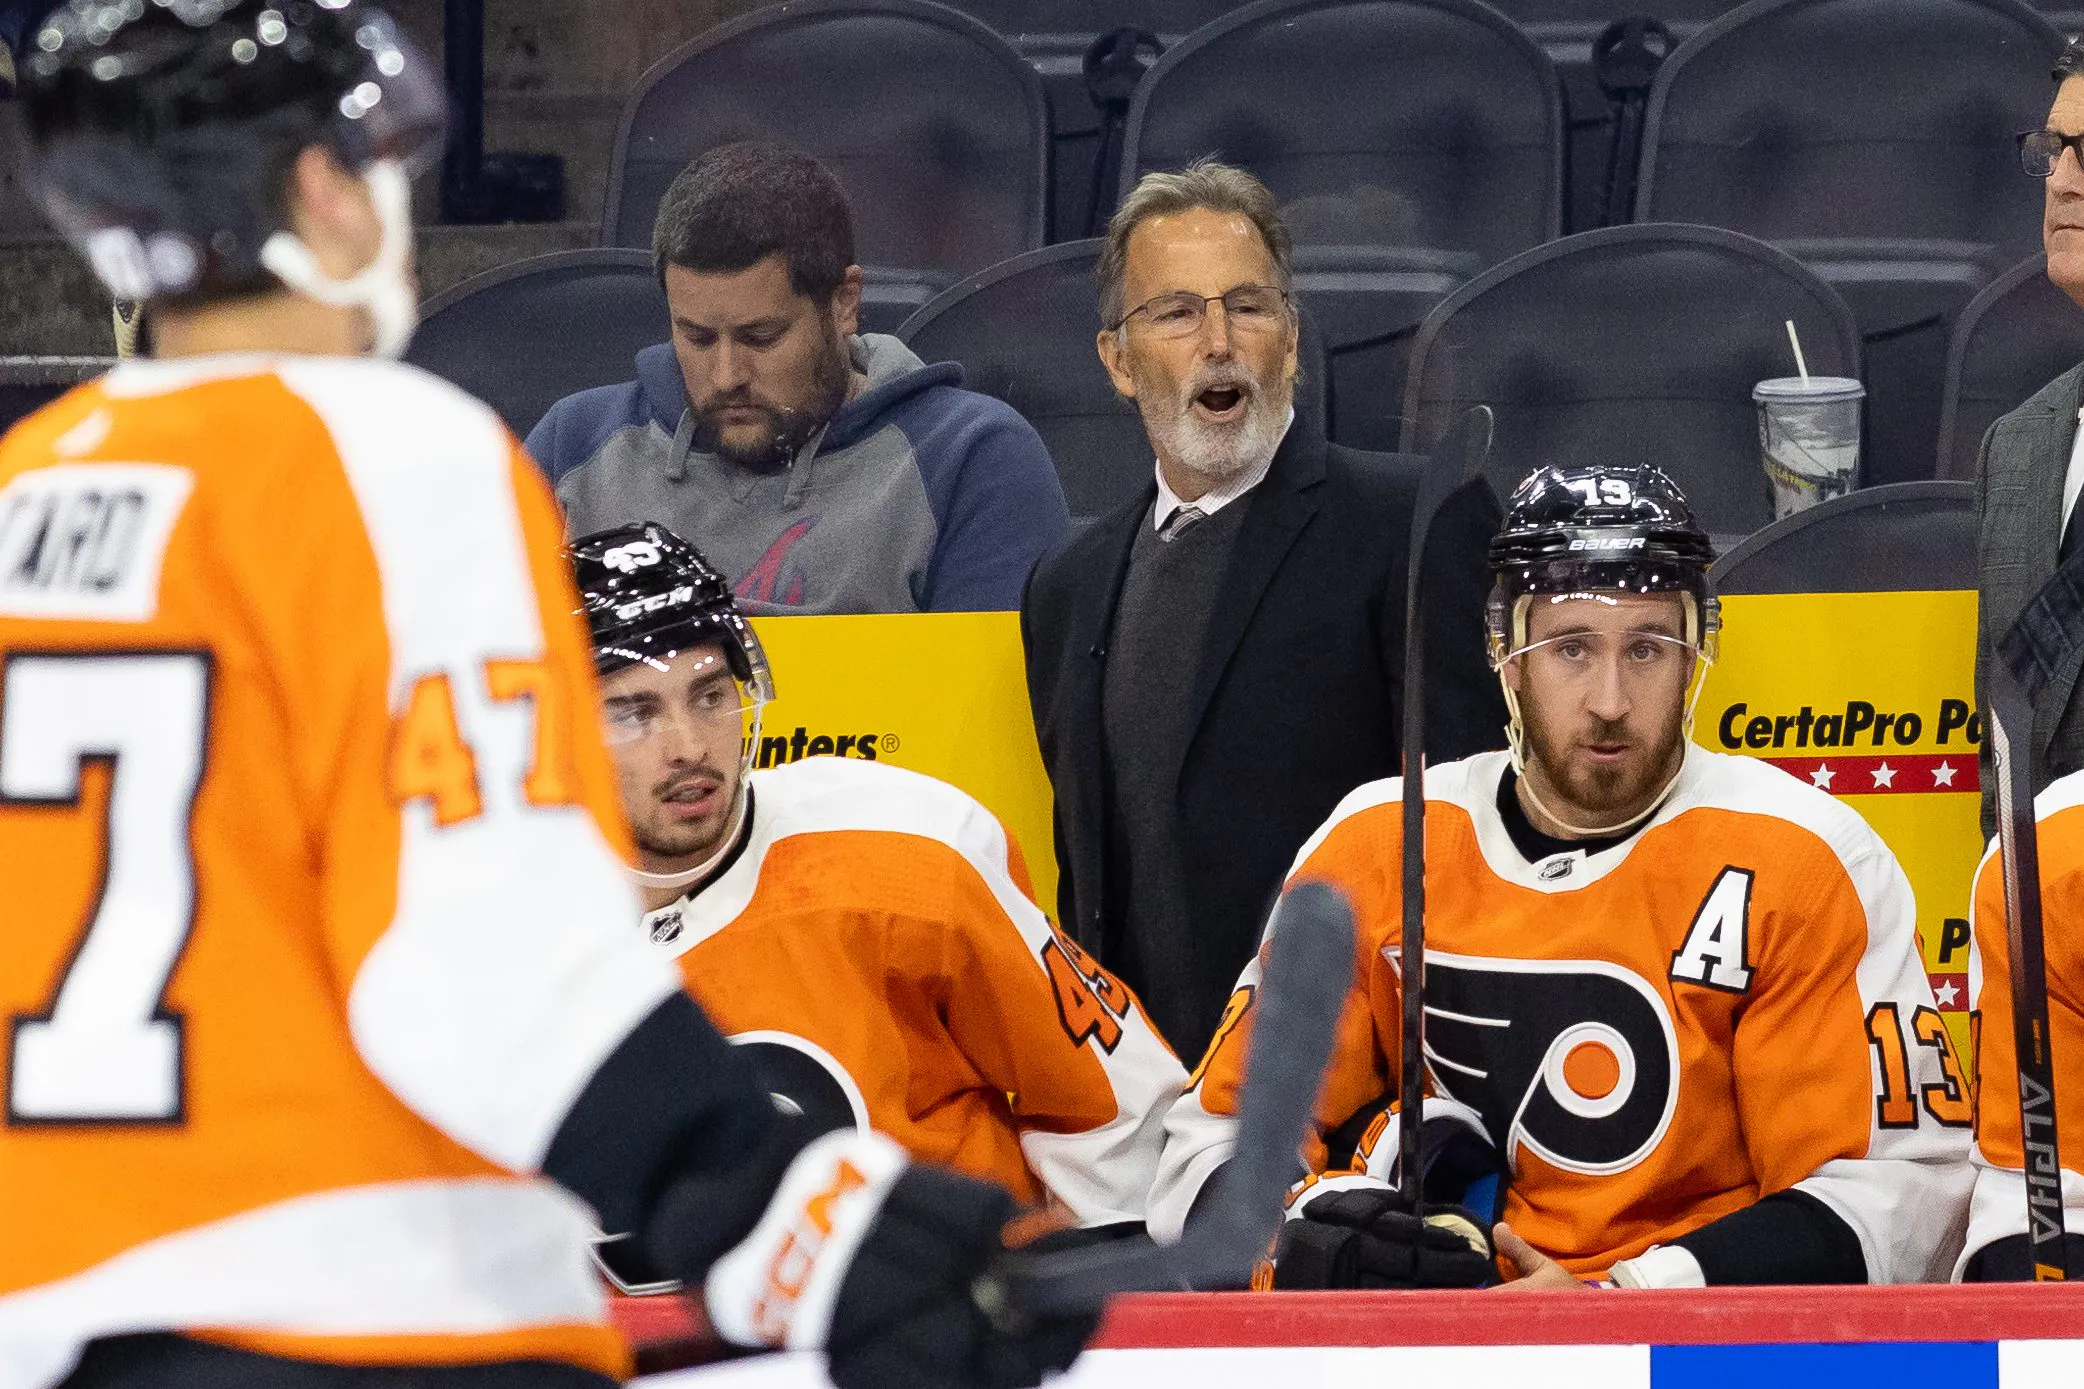 Daily Faceoff Live: Why did John Tortorella healthy scratch the Flyers’ leading scorer?